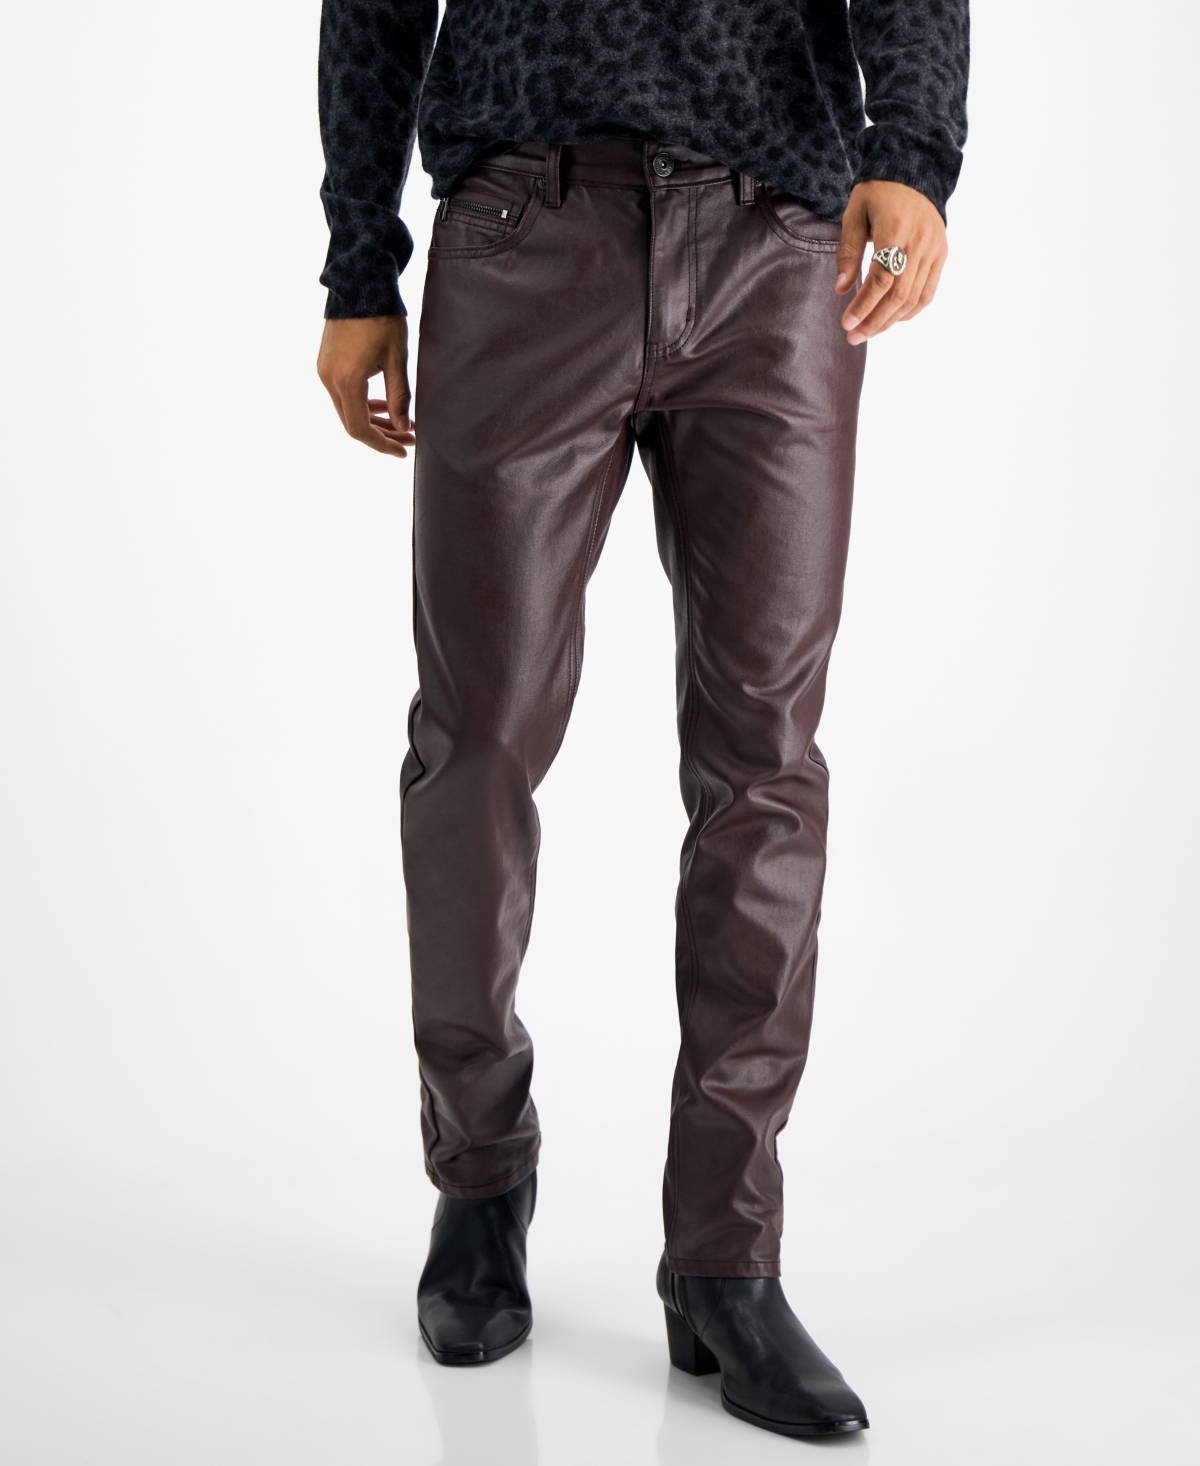 Inc International Concepts Men's Skinny Fit Pleather Pants, Created for Macy's